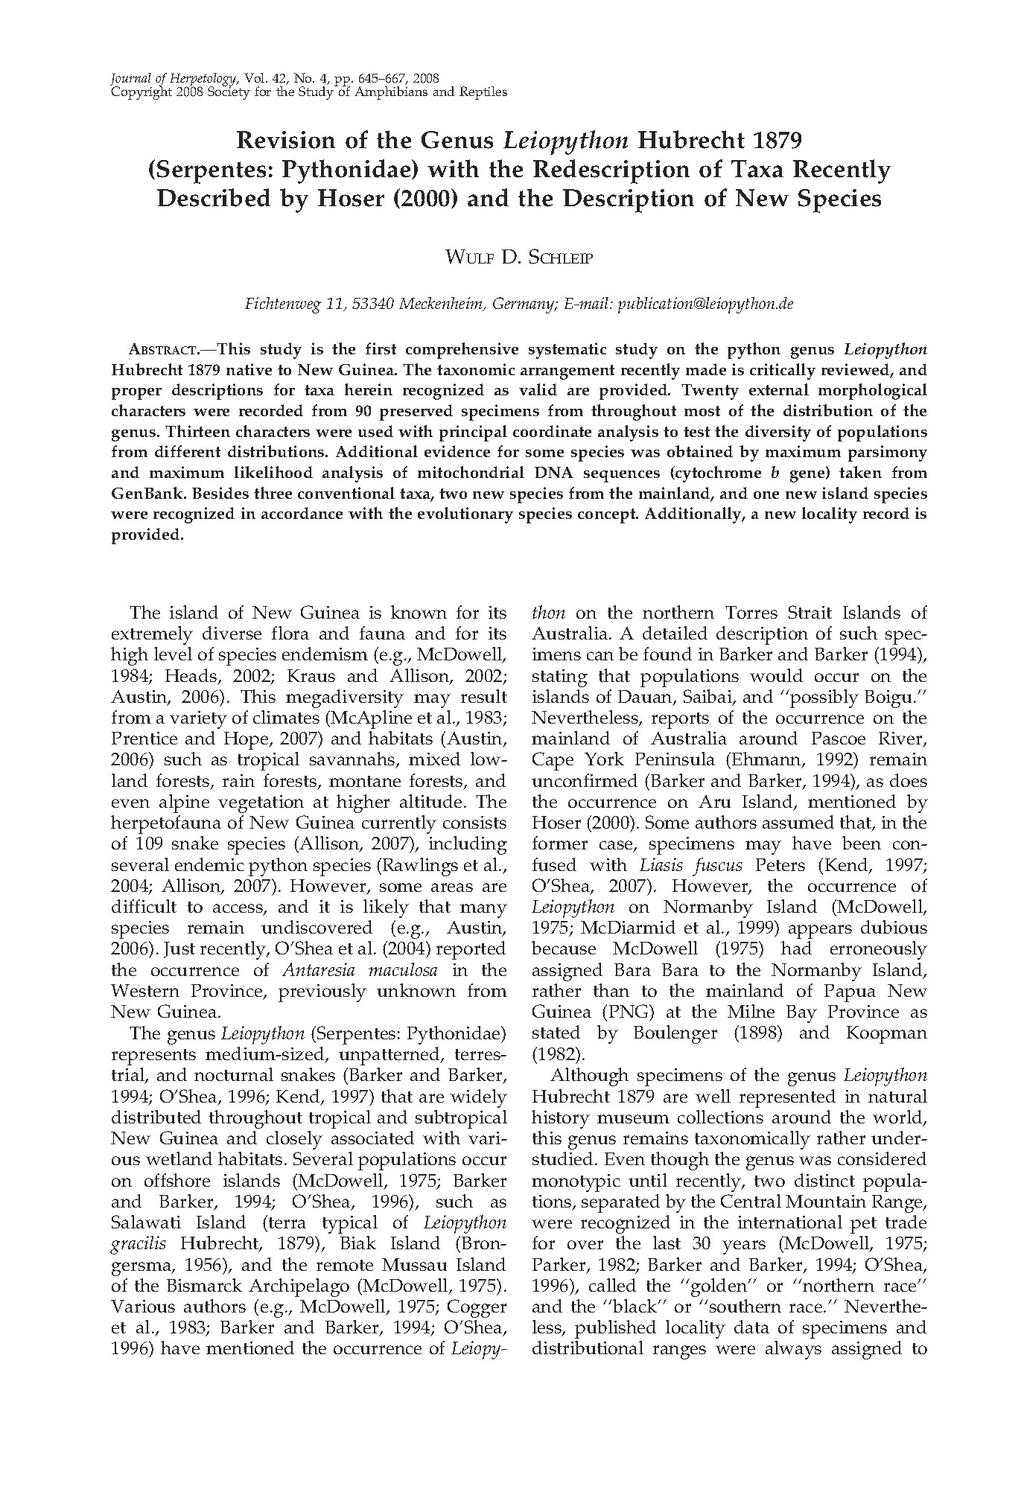 ISSUE 27, PUBLISHED 25 MAY